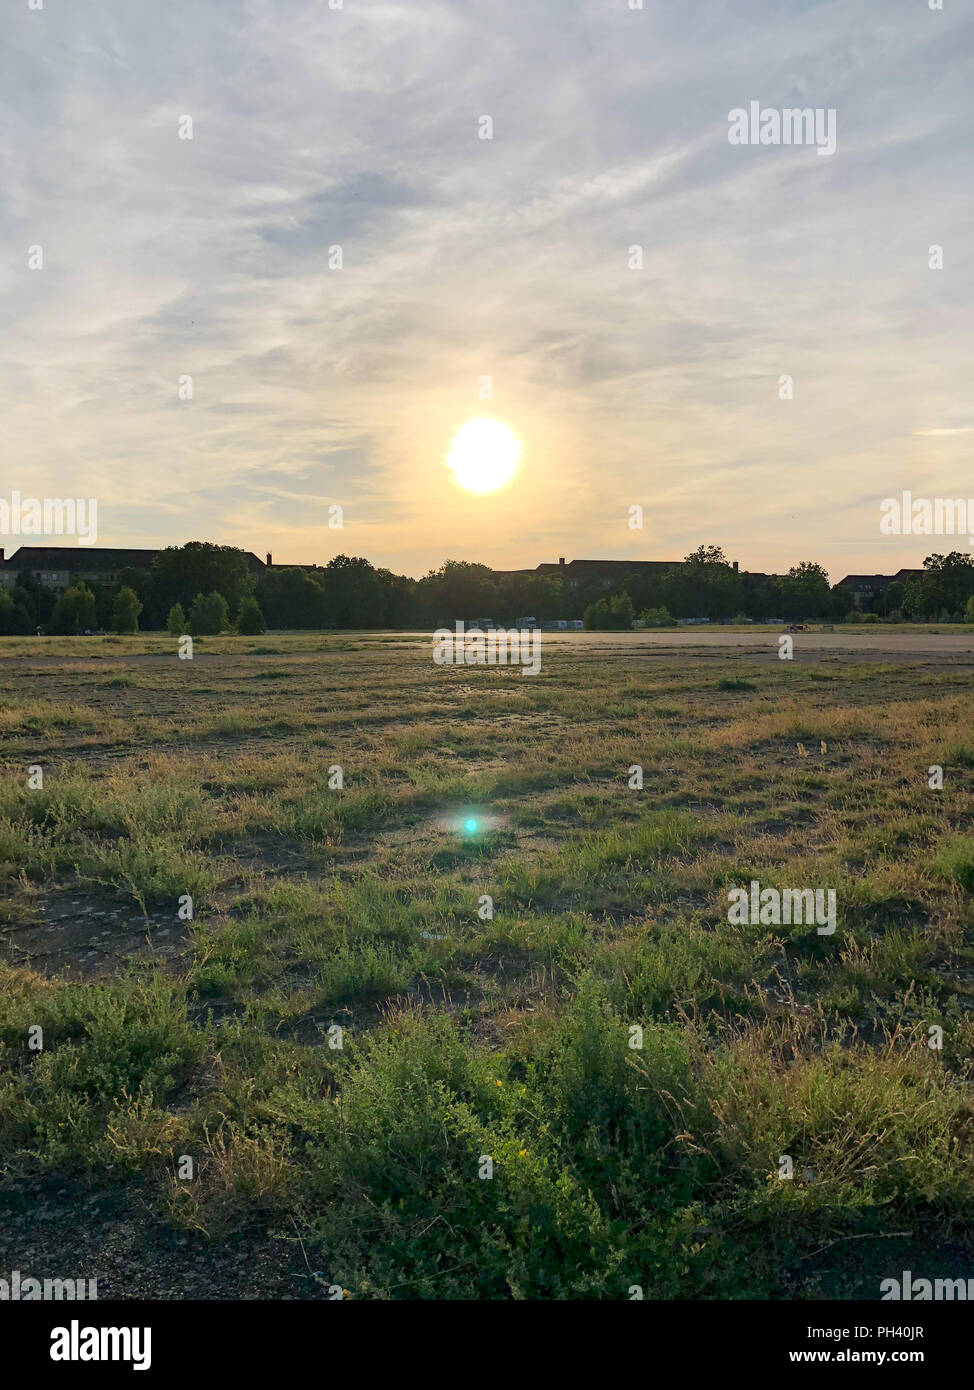 Summer sunset at Tempelhofer Feld, a park at a former airport in Berlin, Germany in 2018. Stock Photo